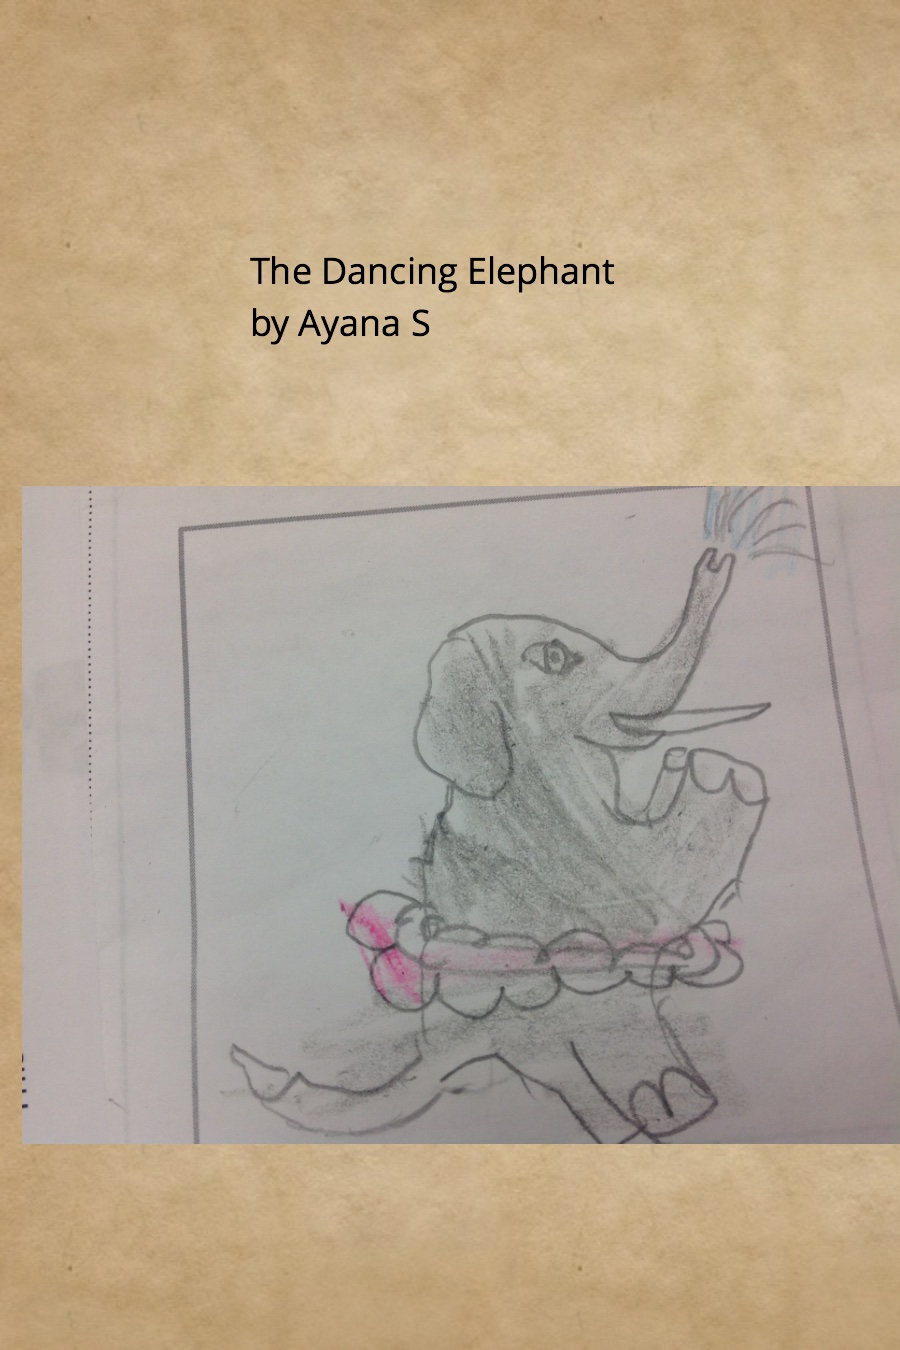 The Dancing Elephant by Ayana S